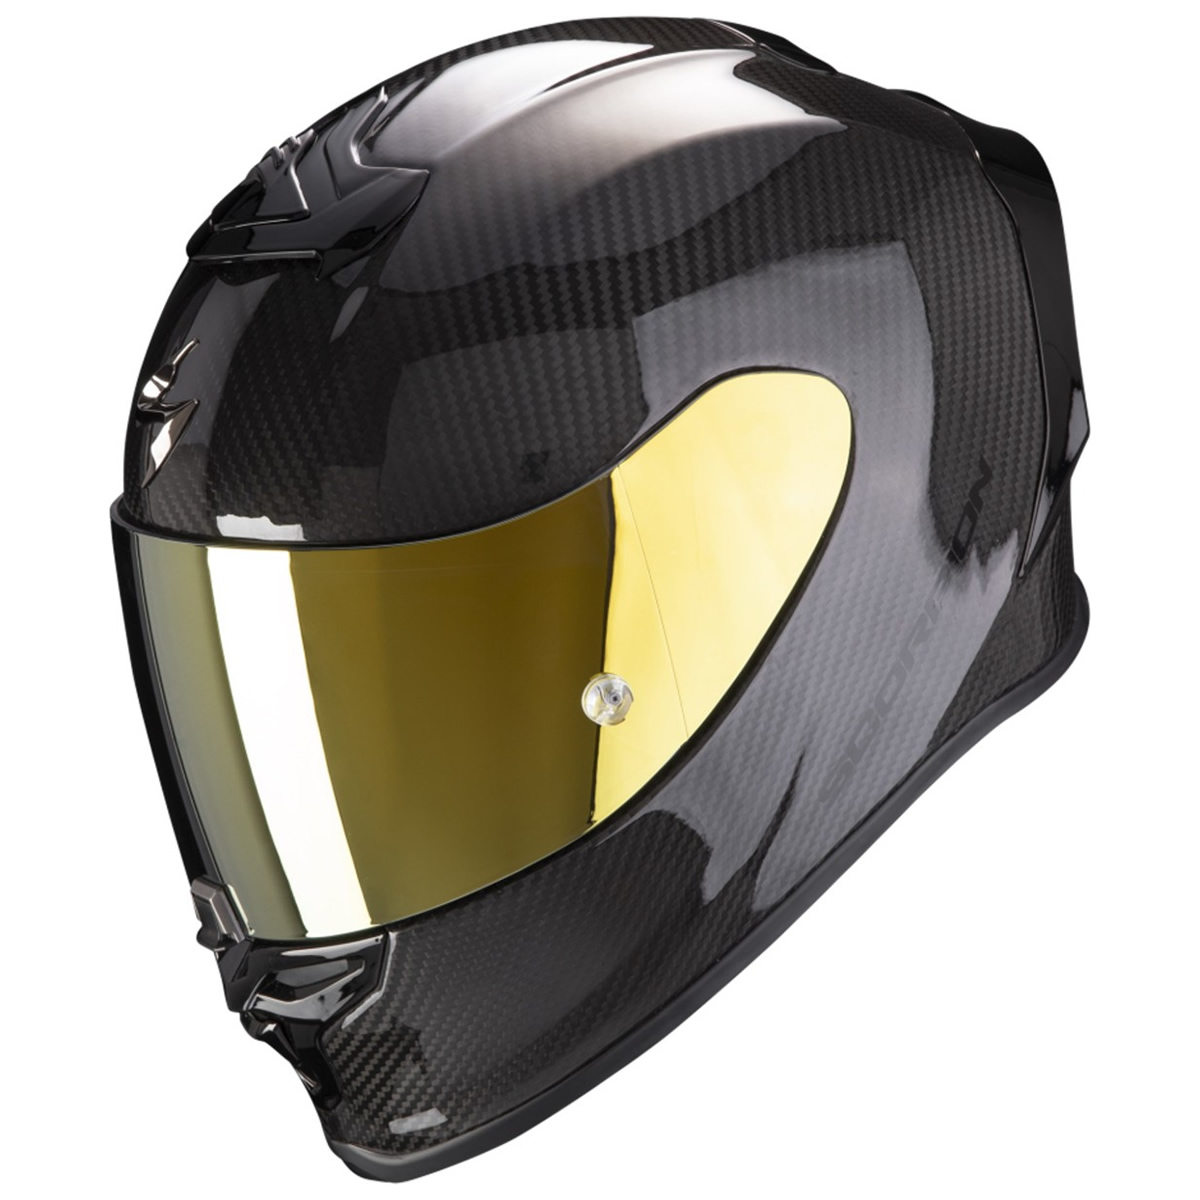 Scorpion Helm EXO-R1 EVO Carbon Air Solid, carbon glanz